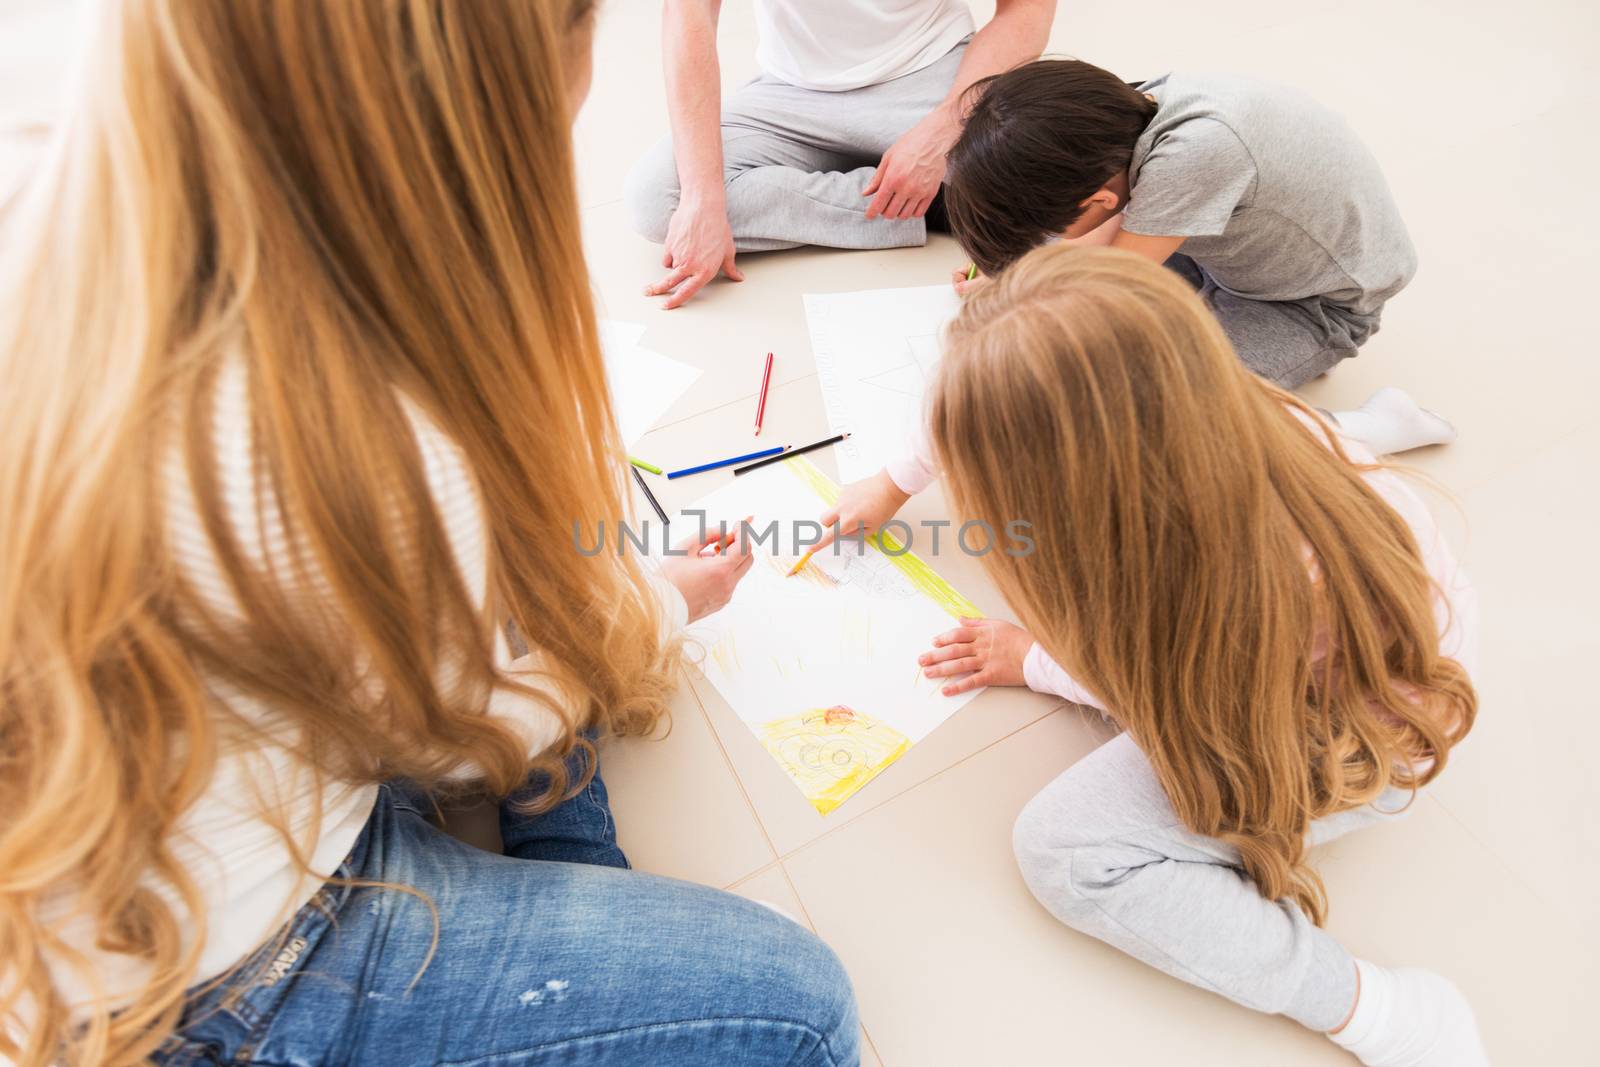 Parents and children drawing with pencils on the floor